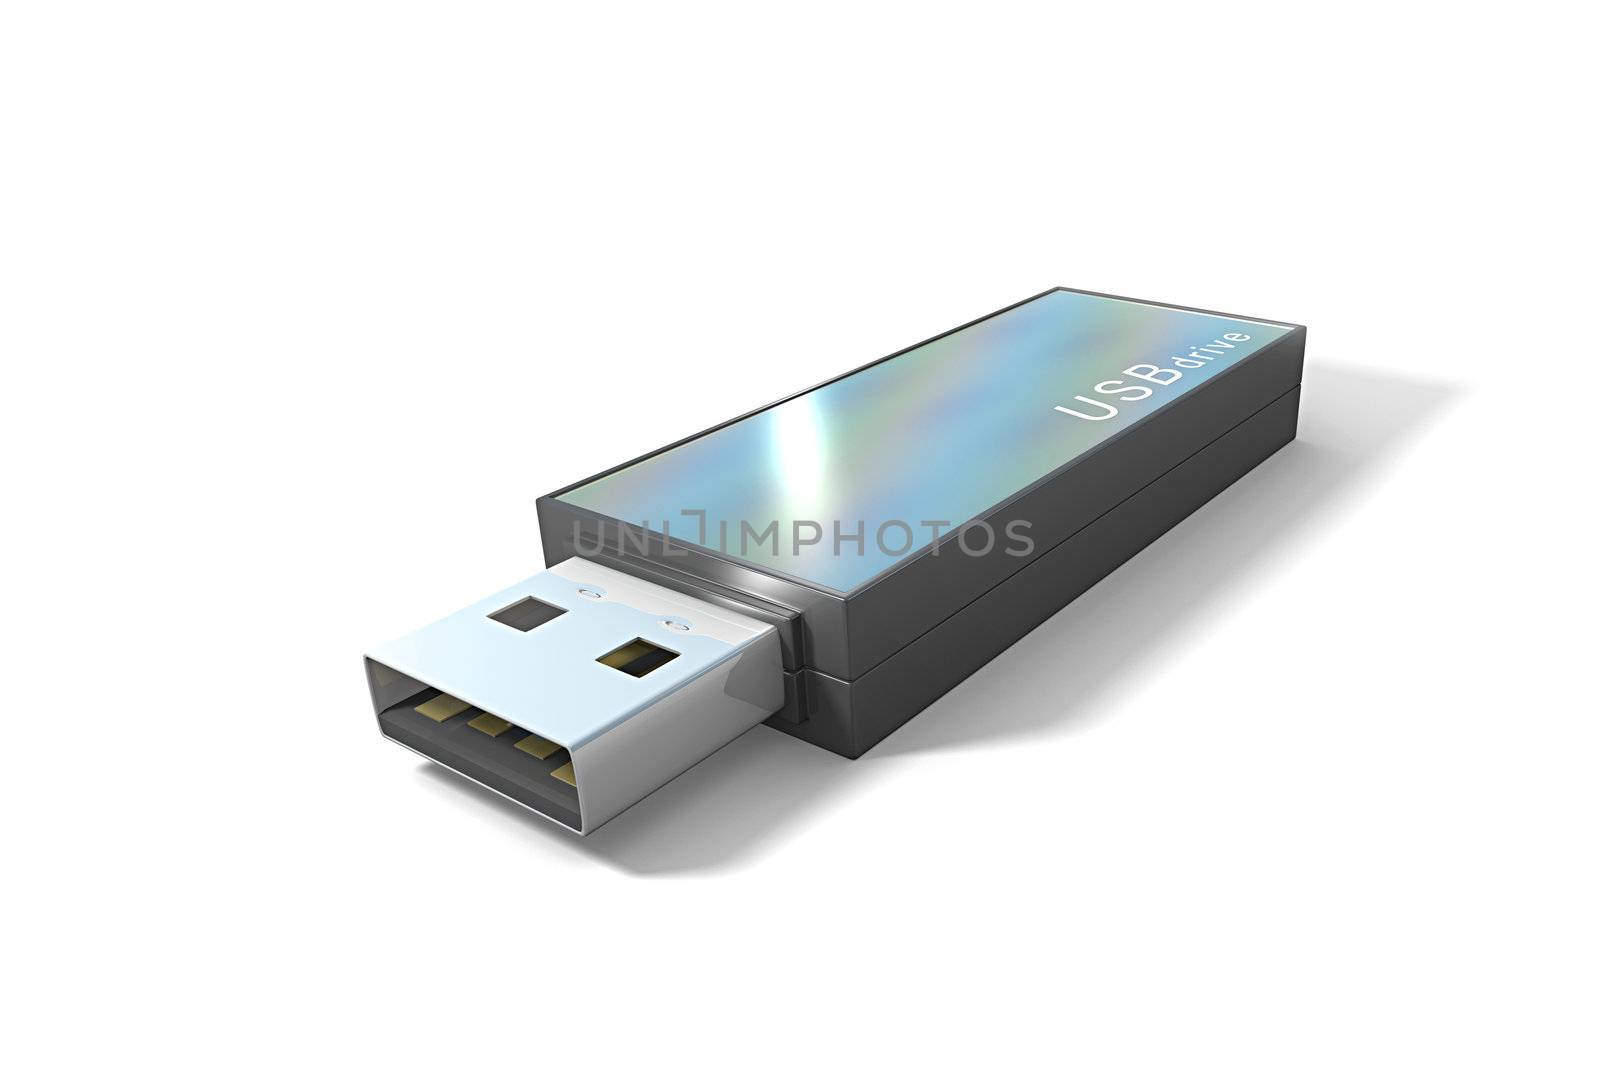 An image of a typical usb stick